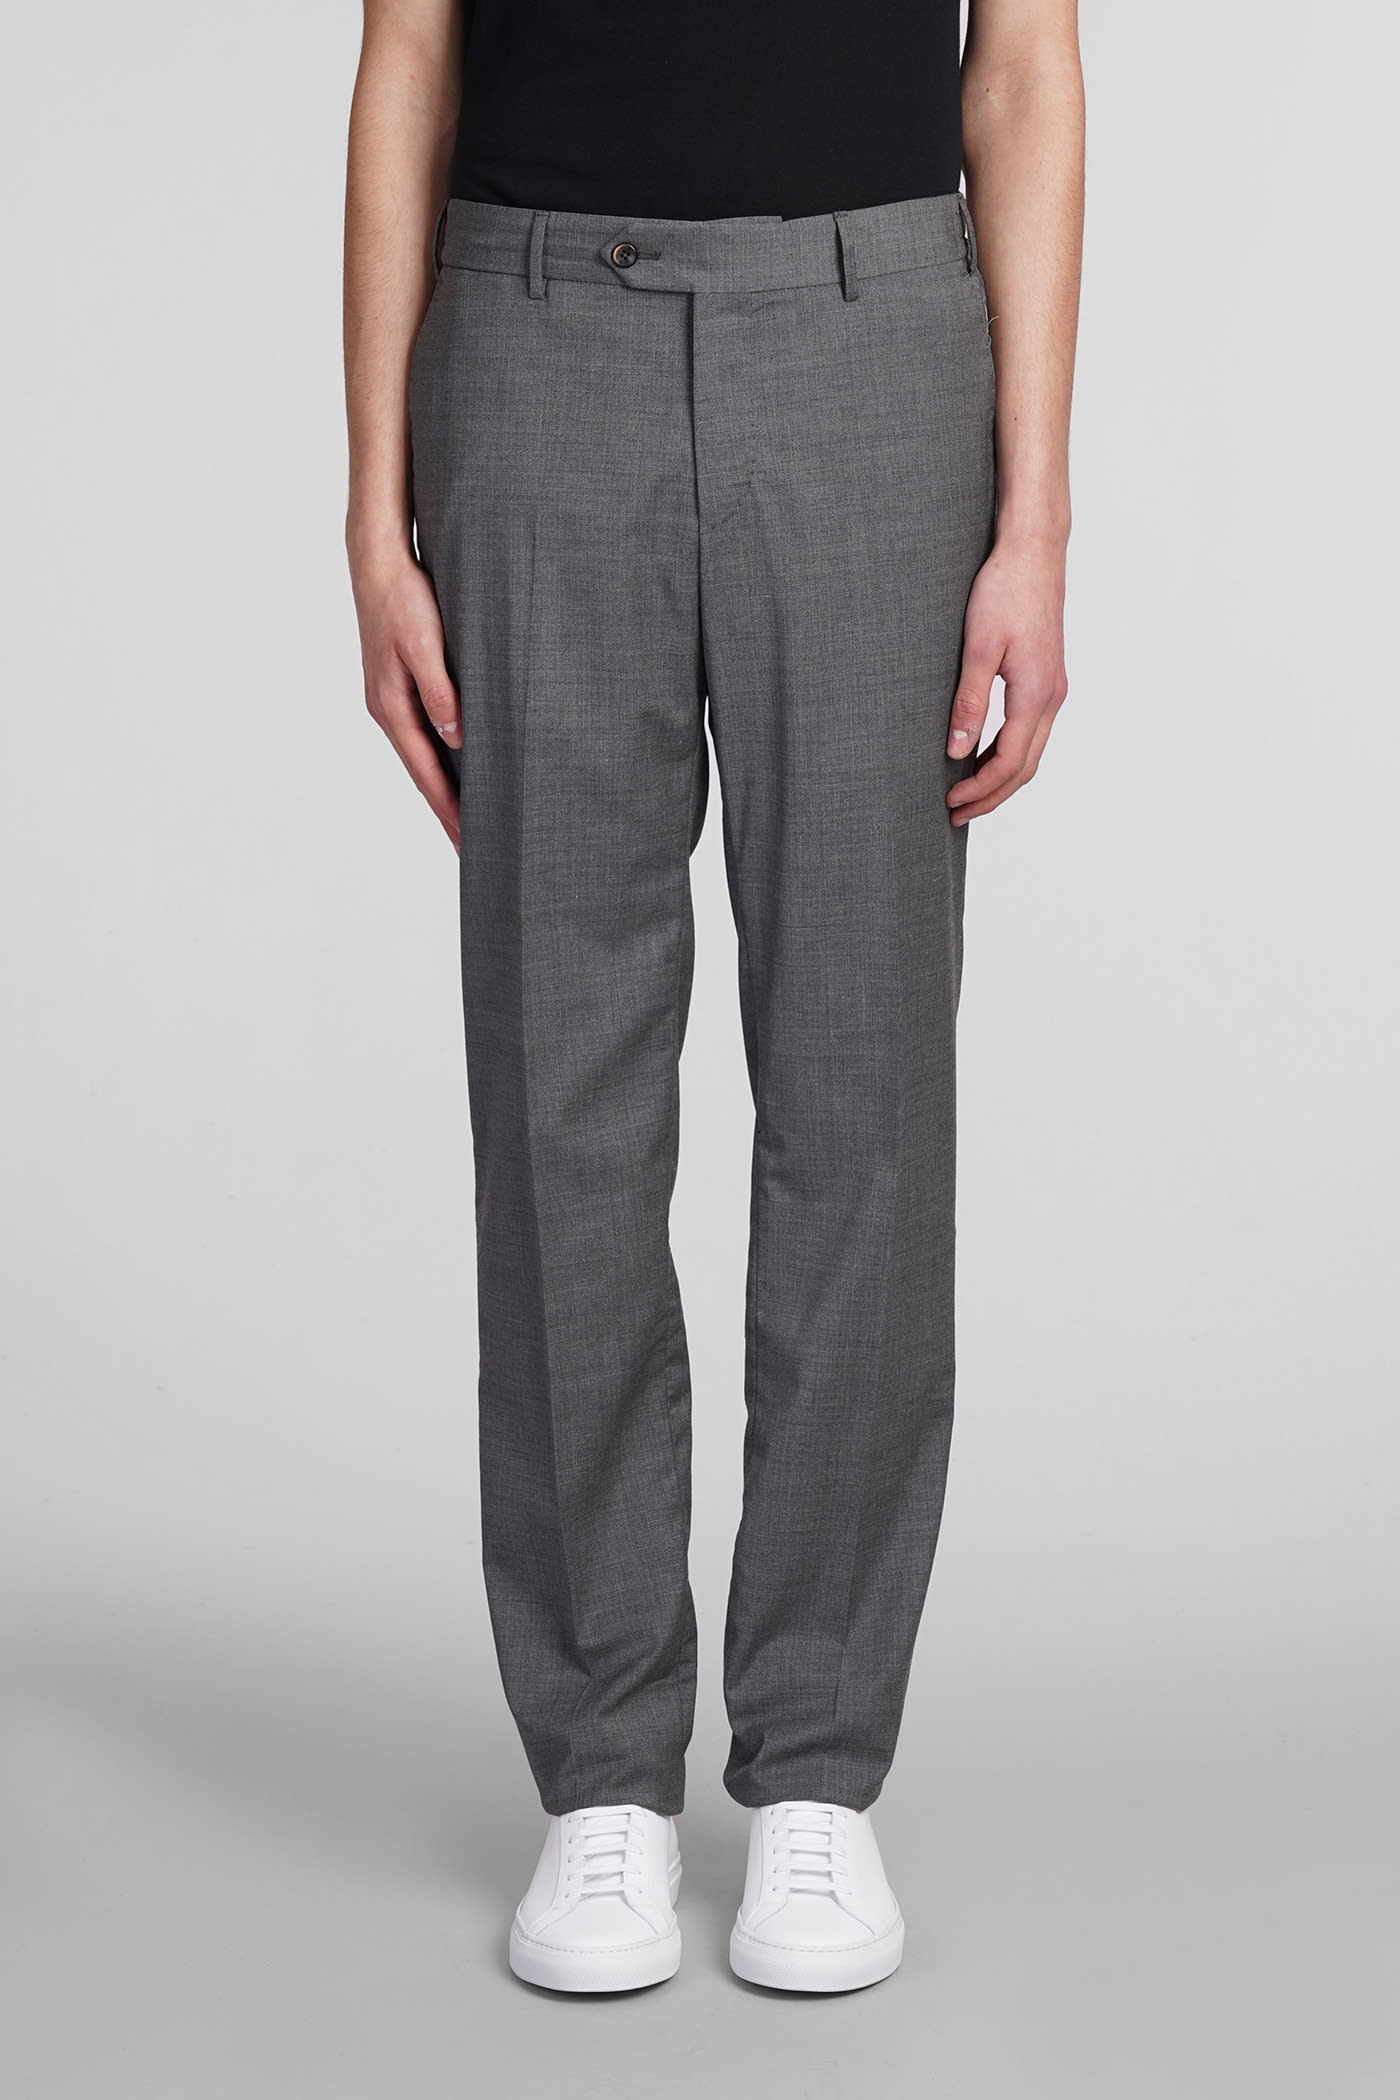 Pt01 Pants In Grey Polyester